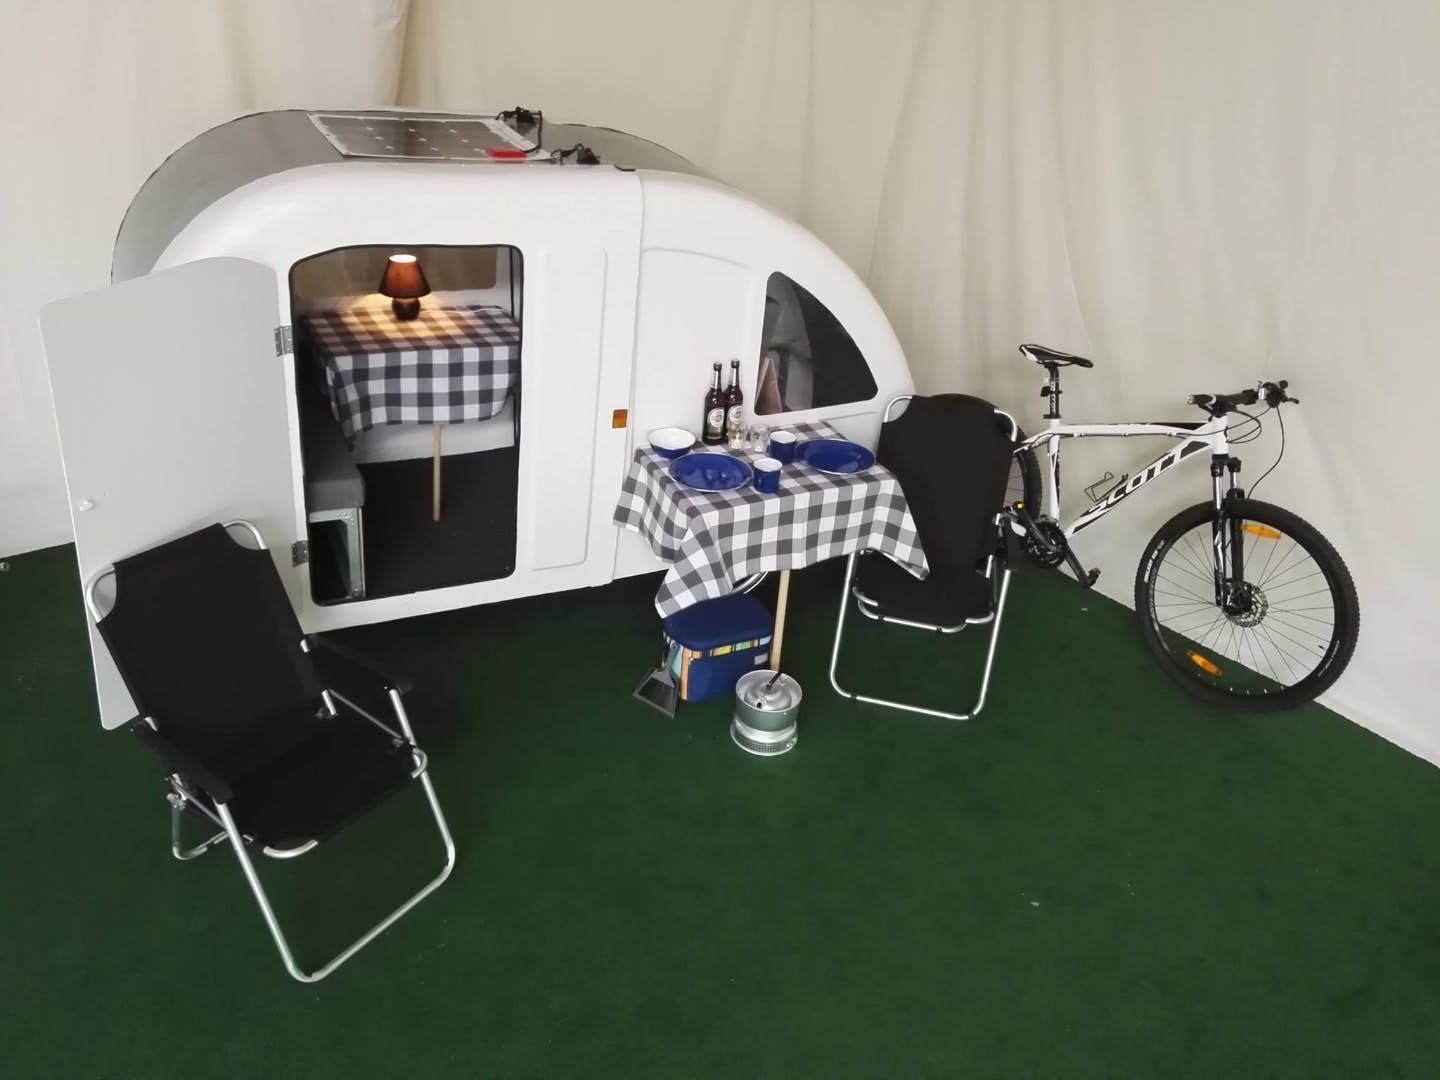  small campers - bicycle camper